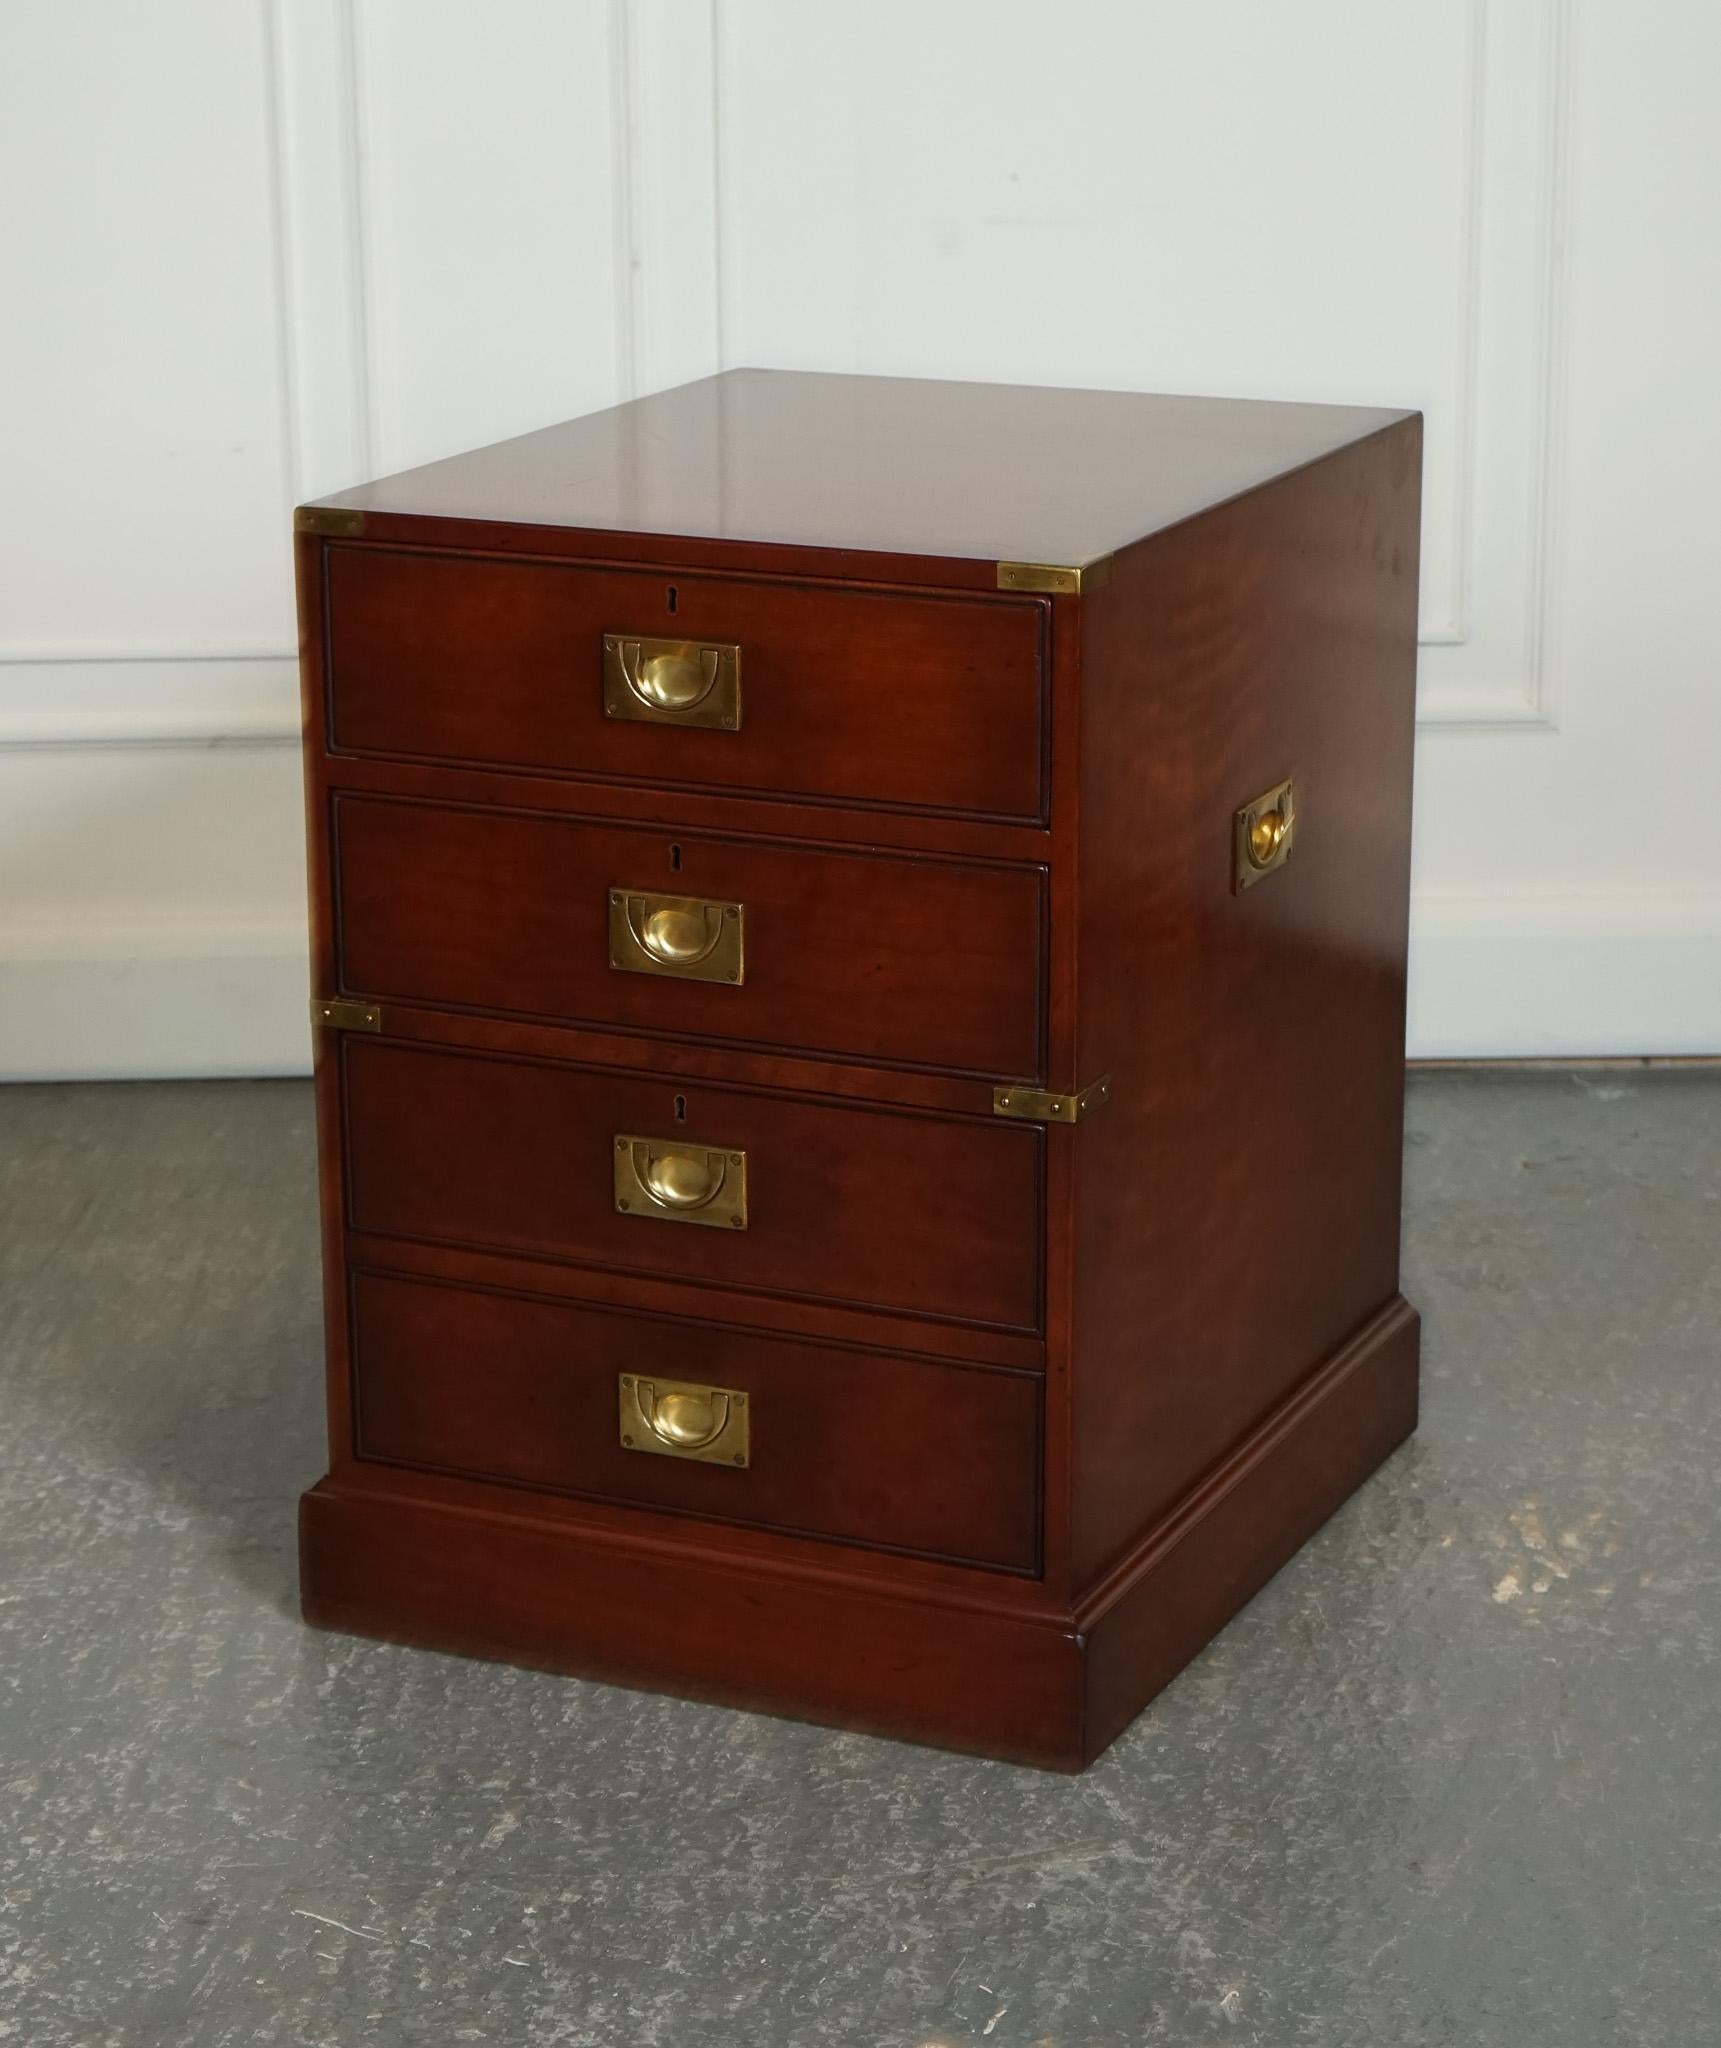 Campaign KENNEDY HARRODS MILiTARY CAMPAIGN OFFICE DRAWERS FILLING CABINET J1 (2/2)